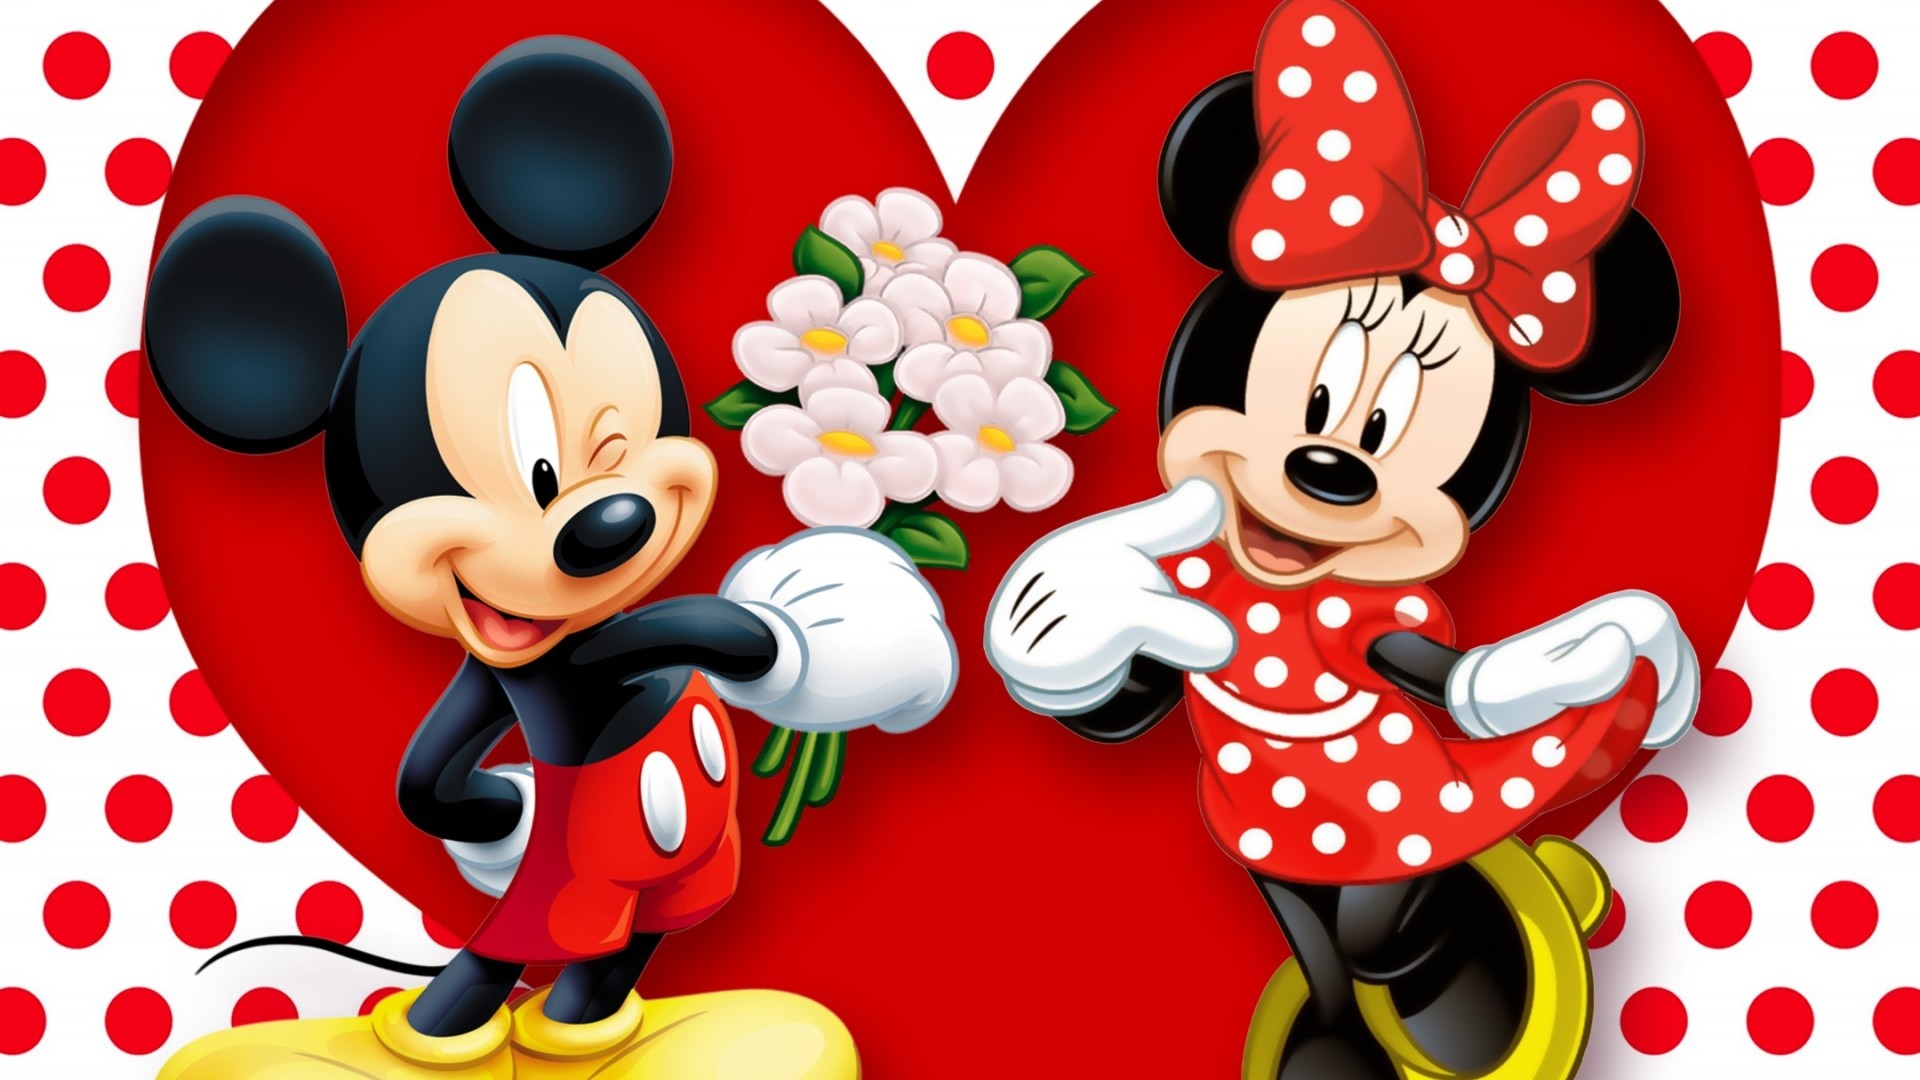 Preview Wallpaper Minnie Mouse Mickey Mouse Mouse 1920x1080 1920x1080